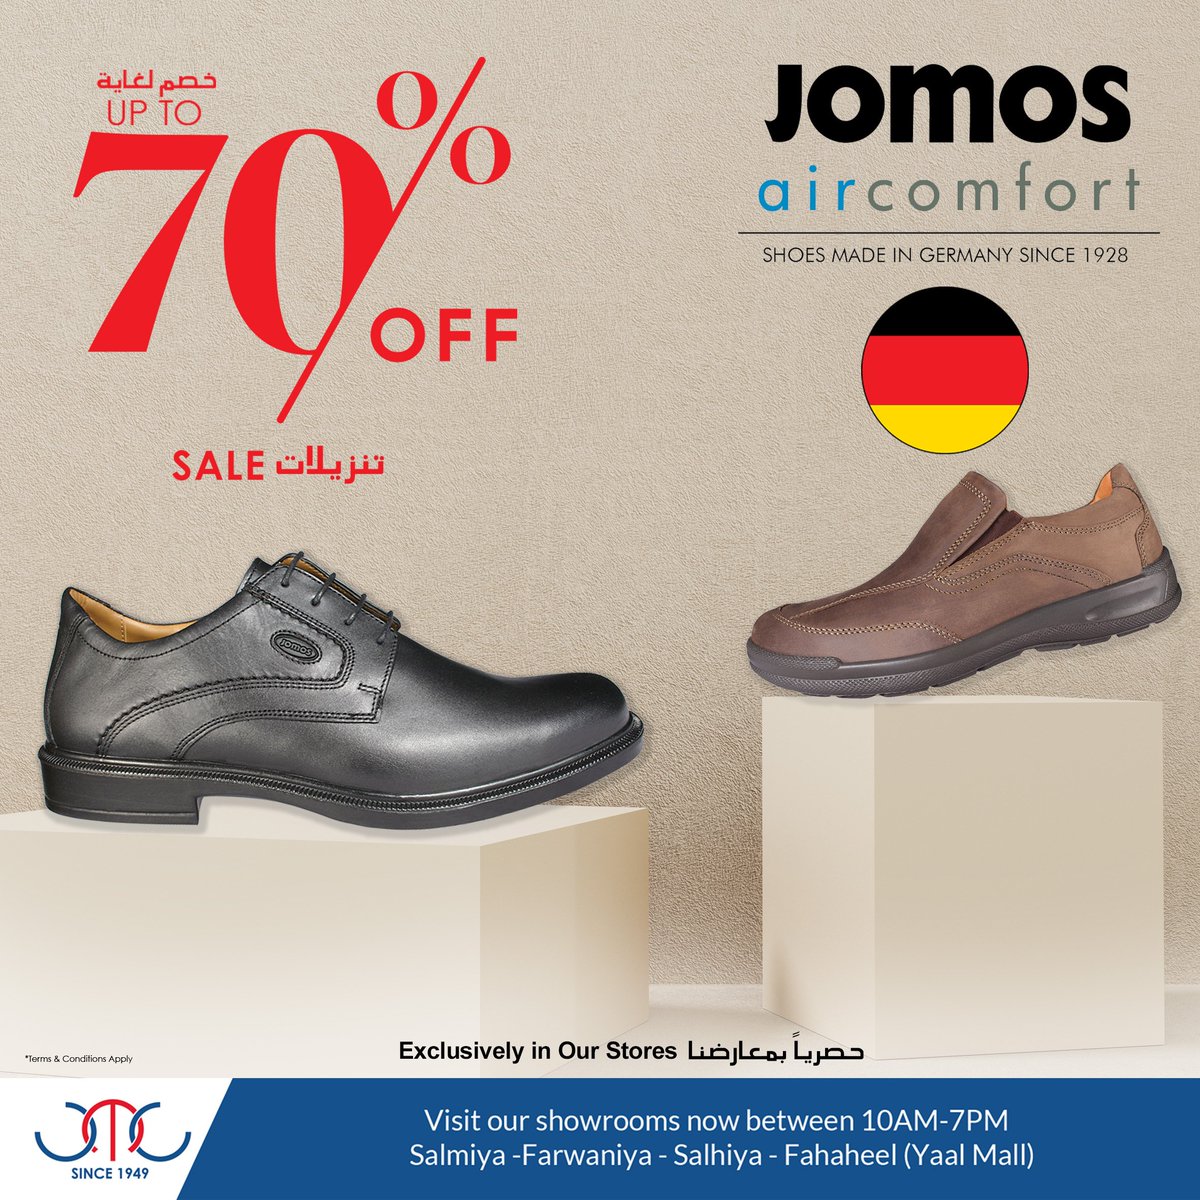 Cathedral mock Soar UTC Kuwait on Twitter: "Don't miss out on the world's most trusted and  efficient range of footwear from Jomos. Produced with Quality, Comfort and  Practicality. Shoes Made in Germany since 1928 🇩🇪 #